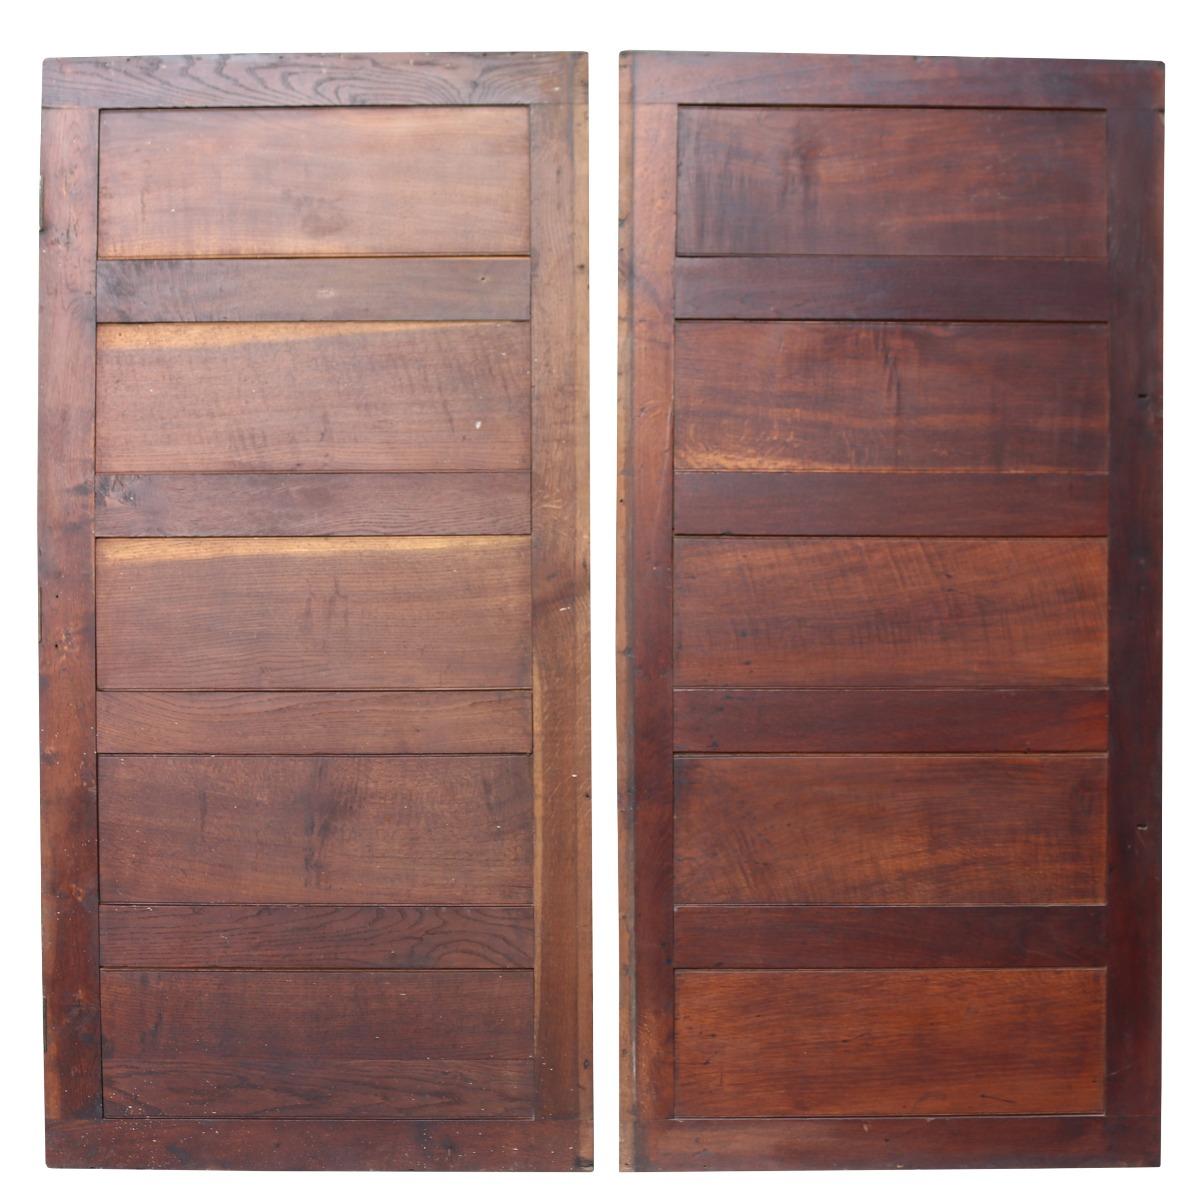 A good quality pair of reclaimed oak panels, also suitable for use as doors

These have a wax finish on the front, bare finish on the reverse side.